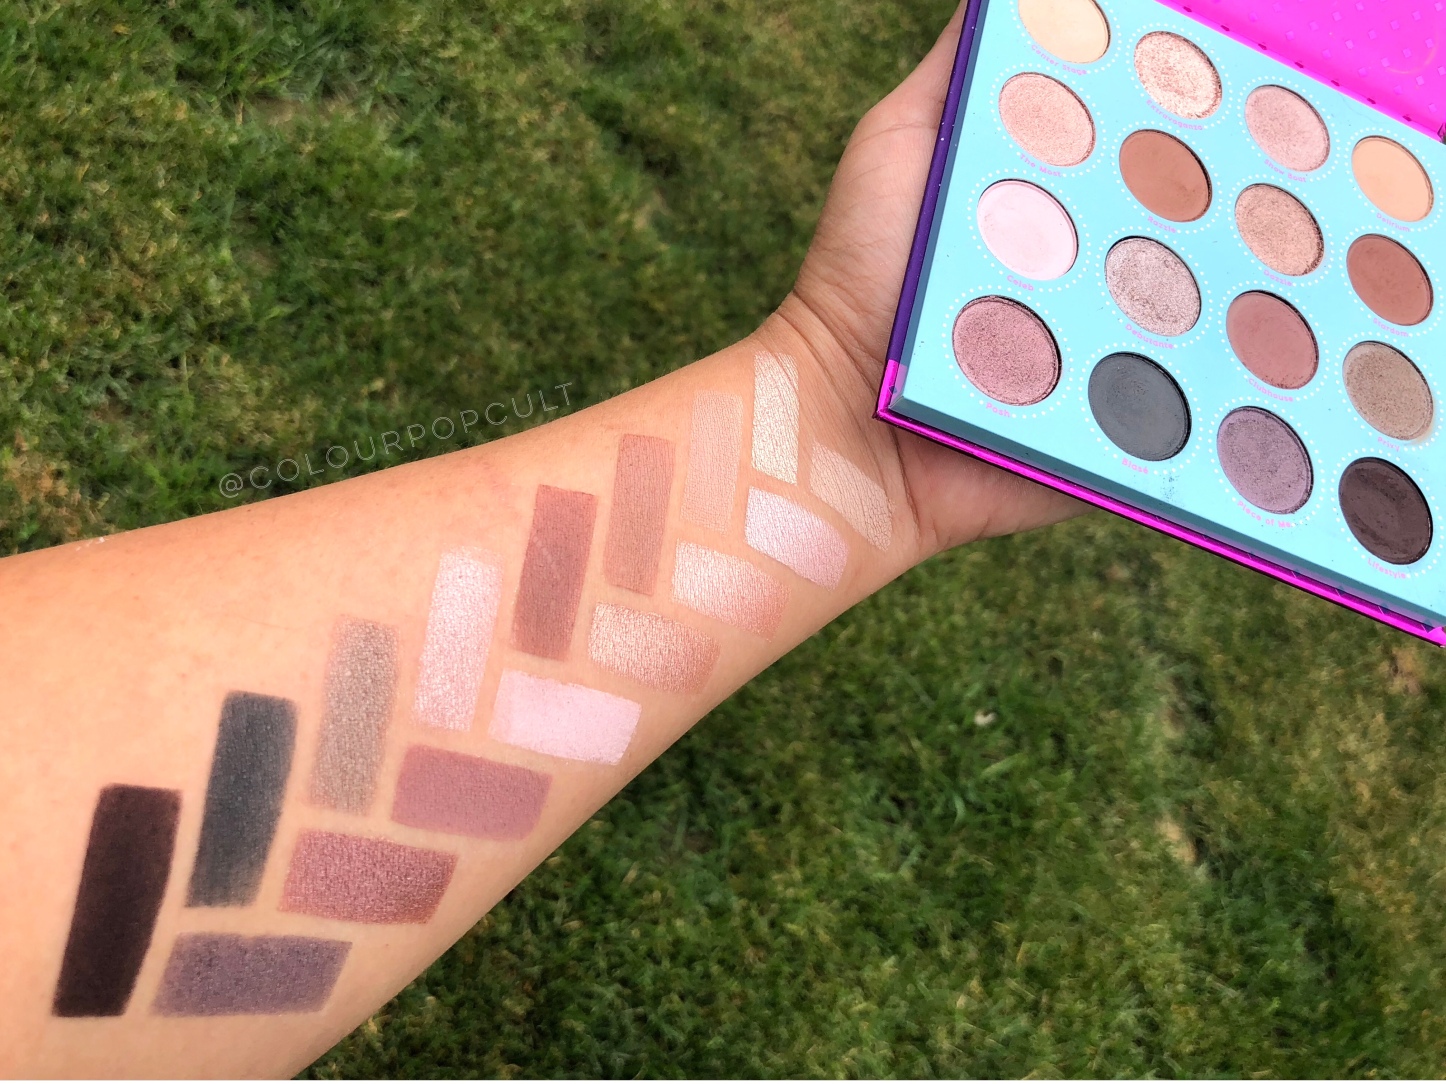 Colourpop Cosmetics FAME PALETTE - this is the first palette that came out ...